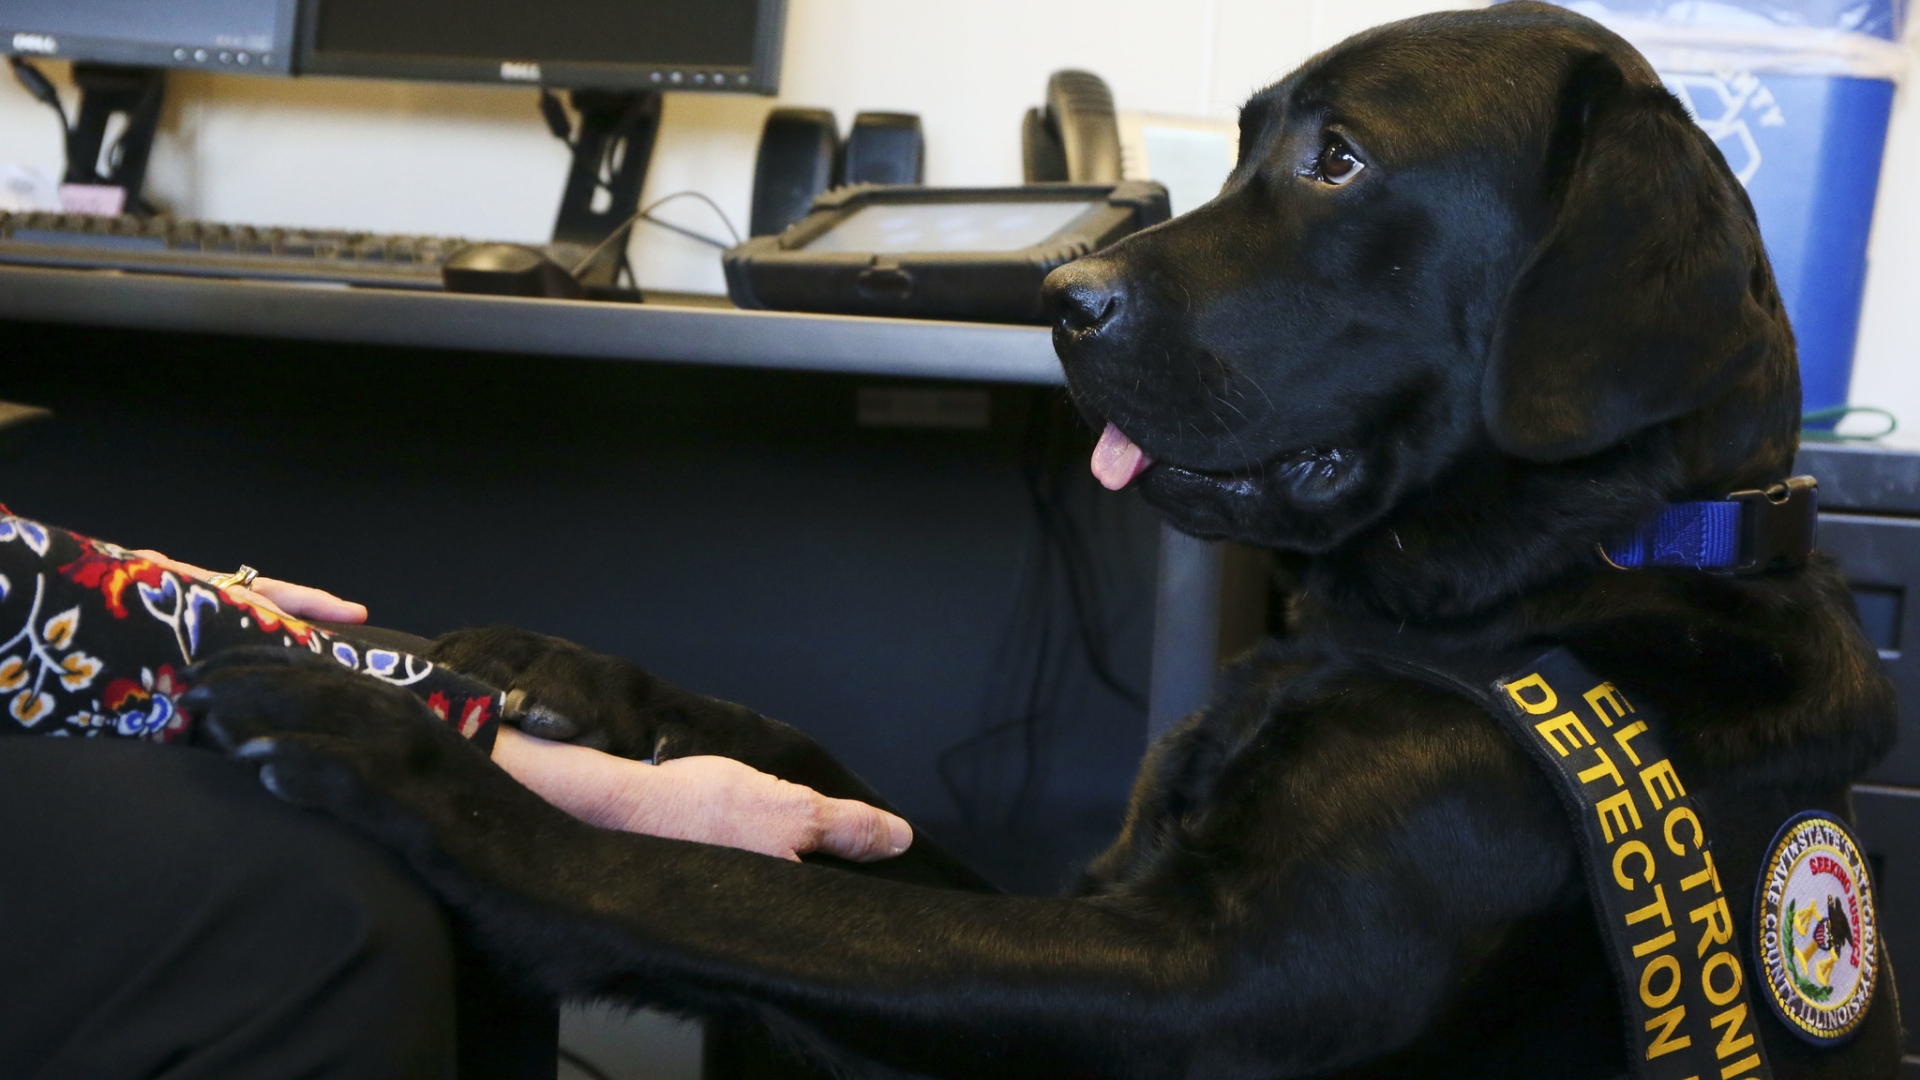 Xx Video Baby - Dogs that can sniff out electronic devices enlisted in the fight ...